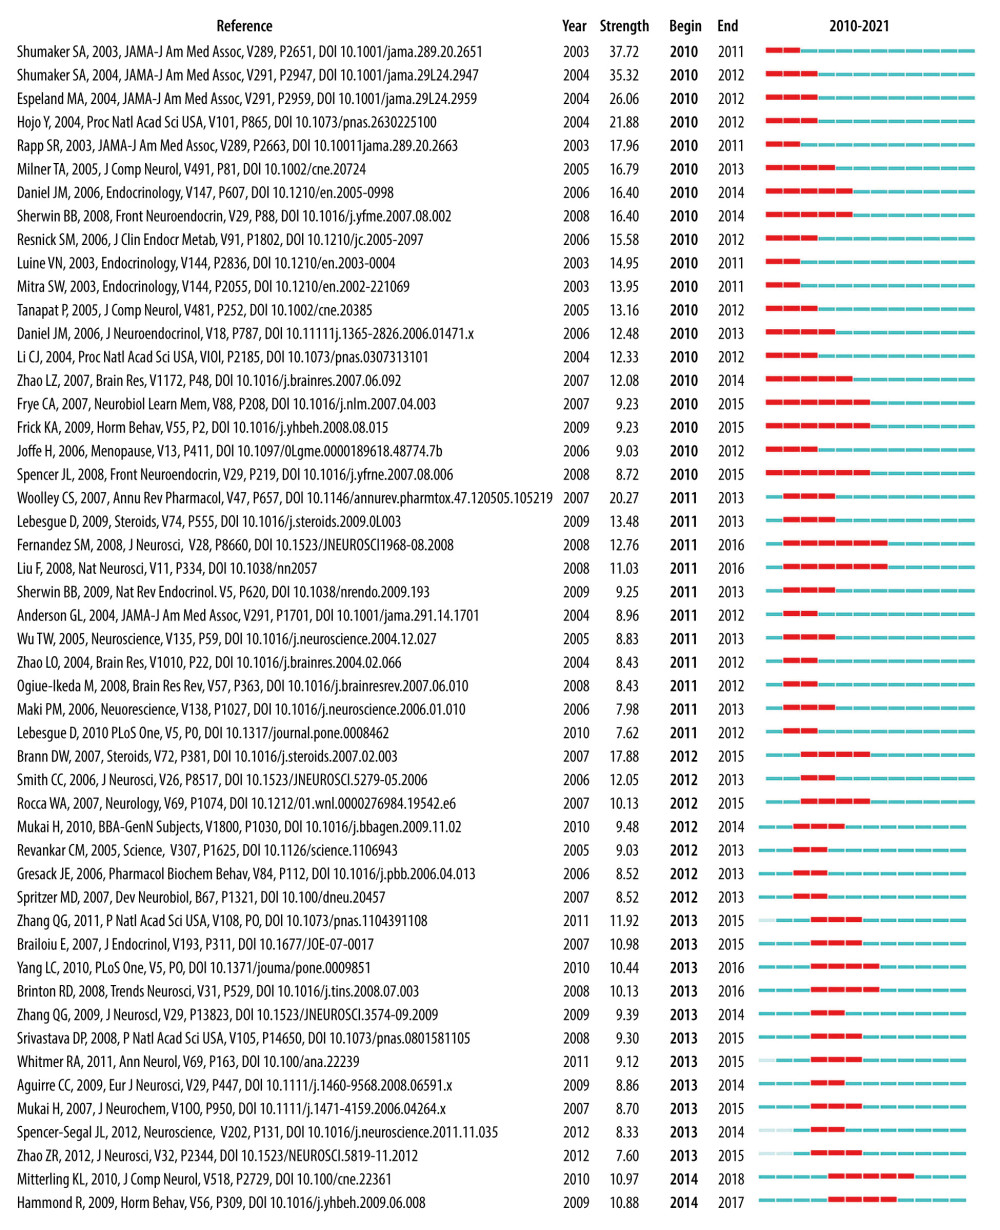 The top 50 co-cited references with the strongest citation bursts sorted by burst time. The burst detection was based on the citations made by the top 50 articles per year during the 12-year period, and the top 100 references with the strongest citation bursts from 2010 to 2021 were identified. Citation burst information include citation information, citation burst strength, burst start time, burst end time, and burst start-to-end time axis diagram. Red bars: Duration of burst. (Software: CiteSpace 5.7.R5W, Drexel University, Philadelphia, USA).